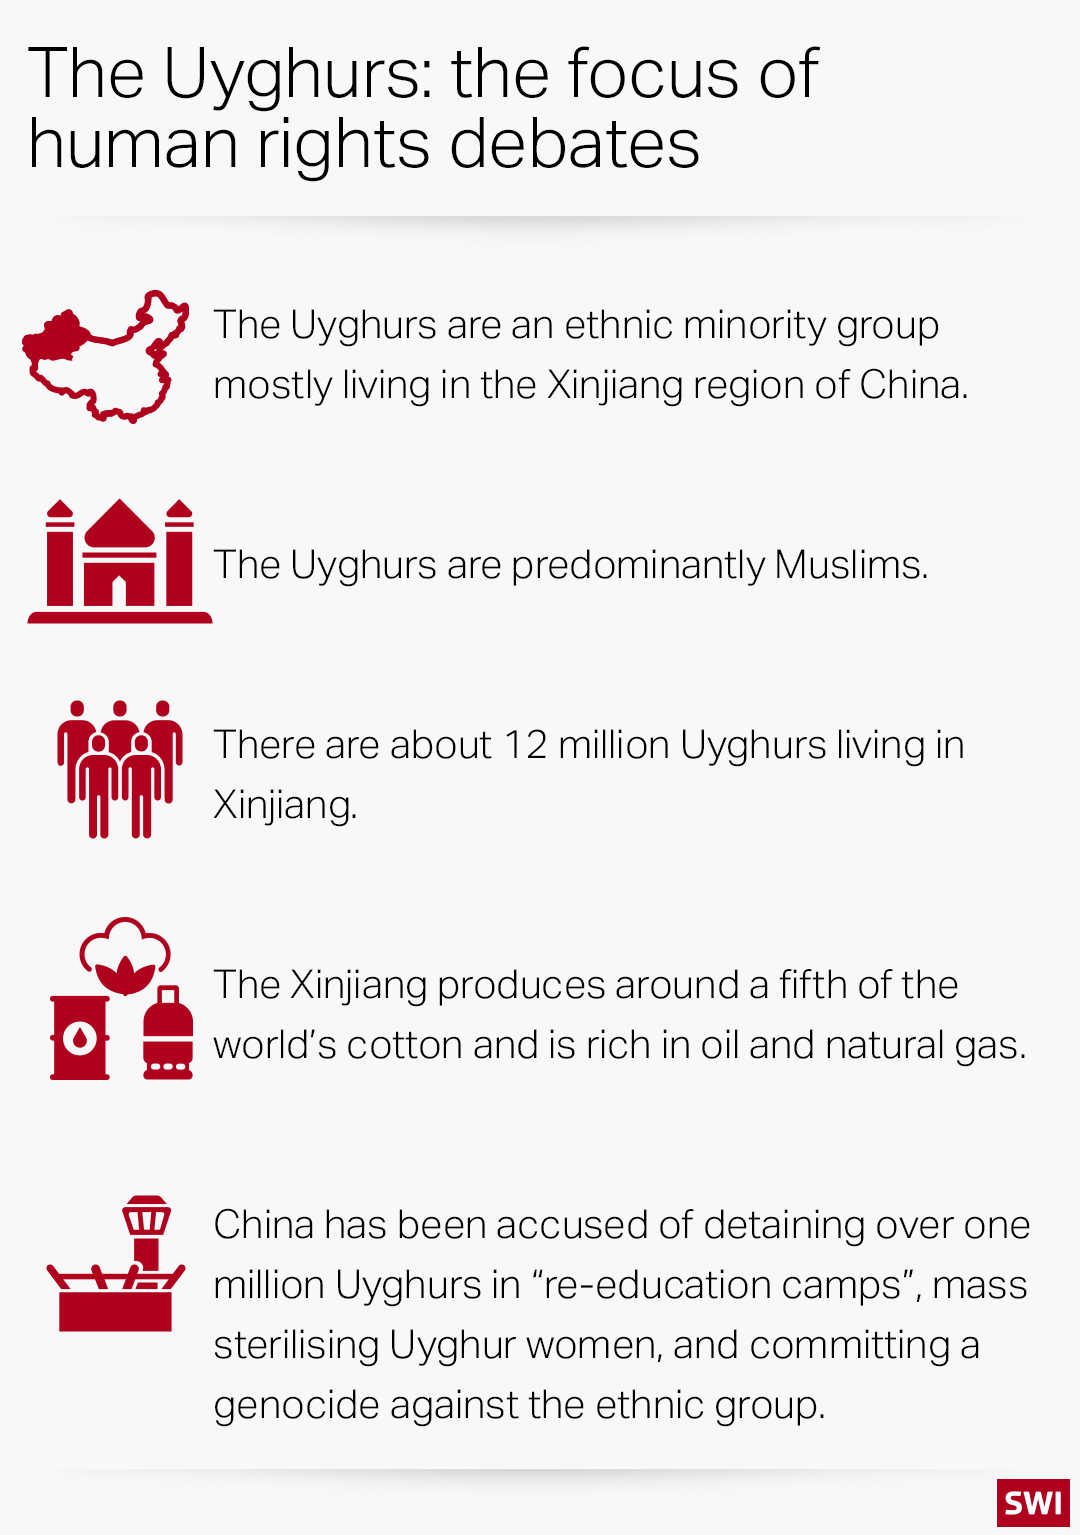 Chart with information about the Uyghurs population